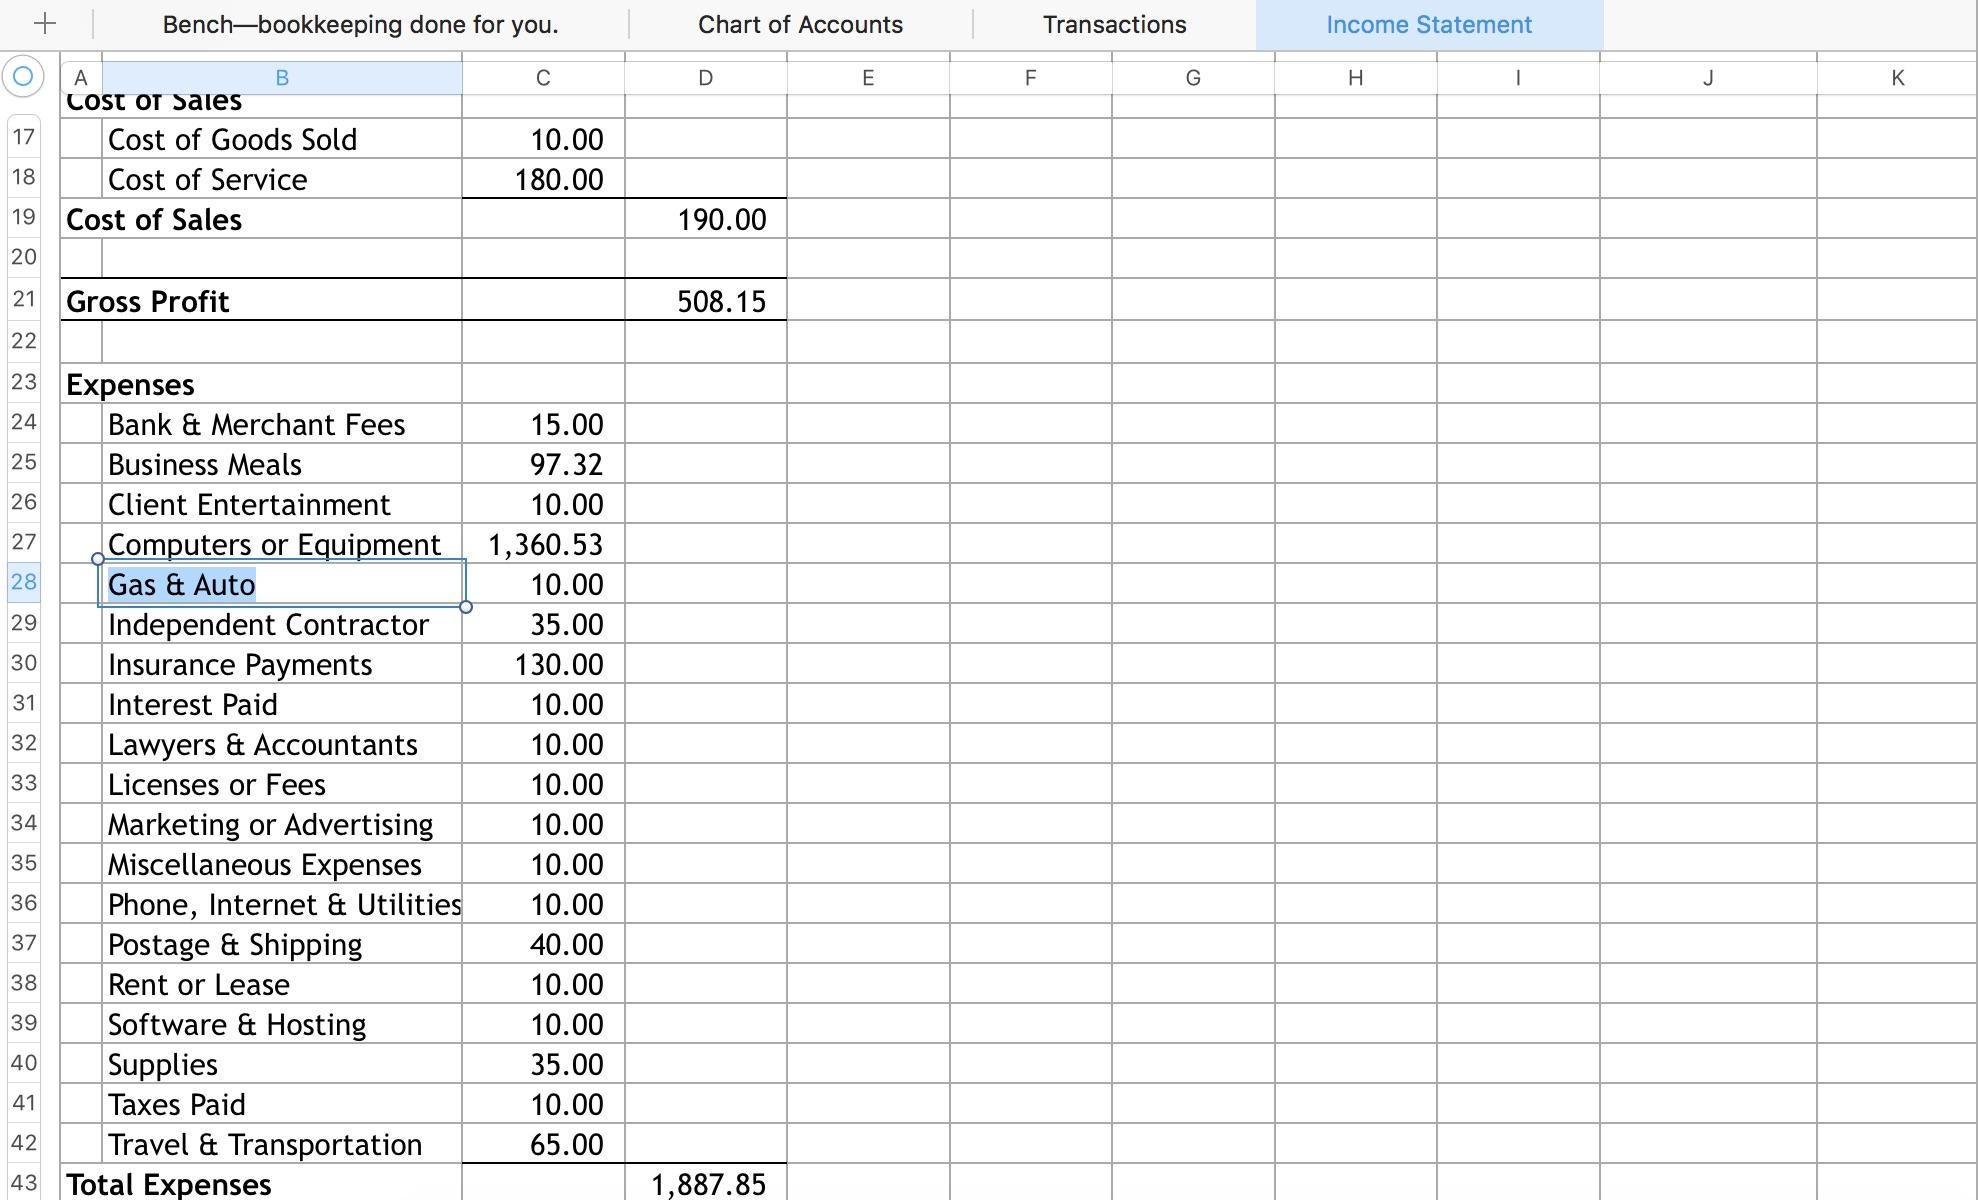 Bench Income statement template